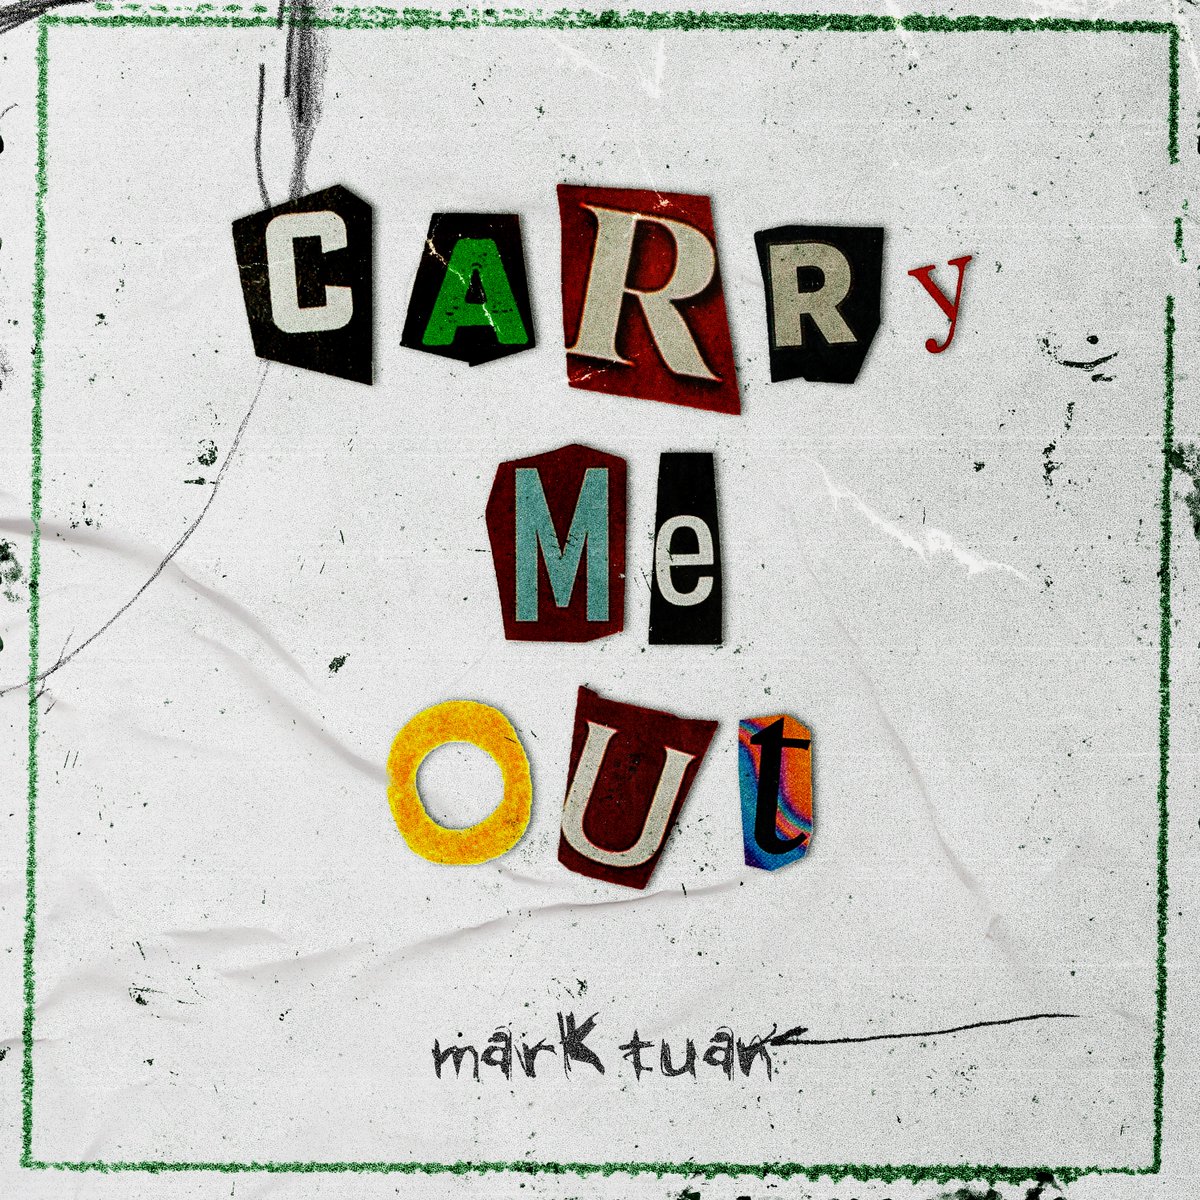 Carry Me Out March 31, 2023 #MarkTuan #Mark #마크 #段宜恩 #CarryMeOut #CarryMeOut_MarkTuan @marktuan